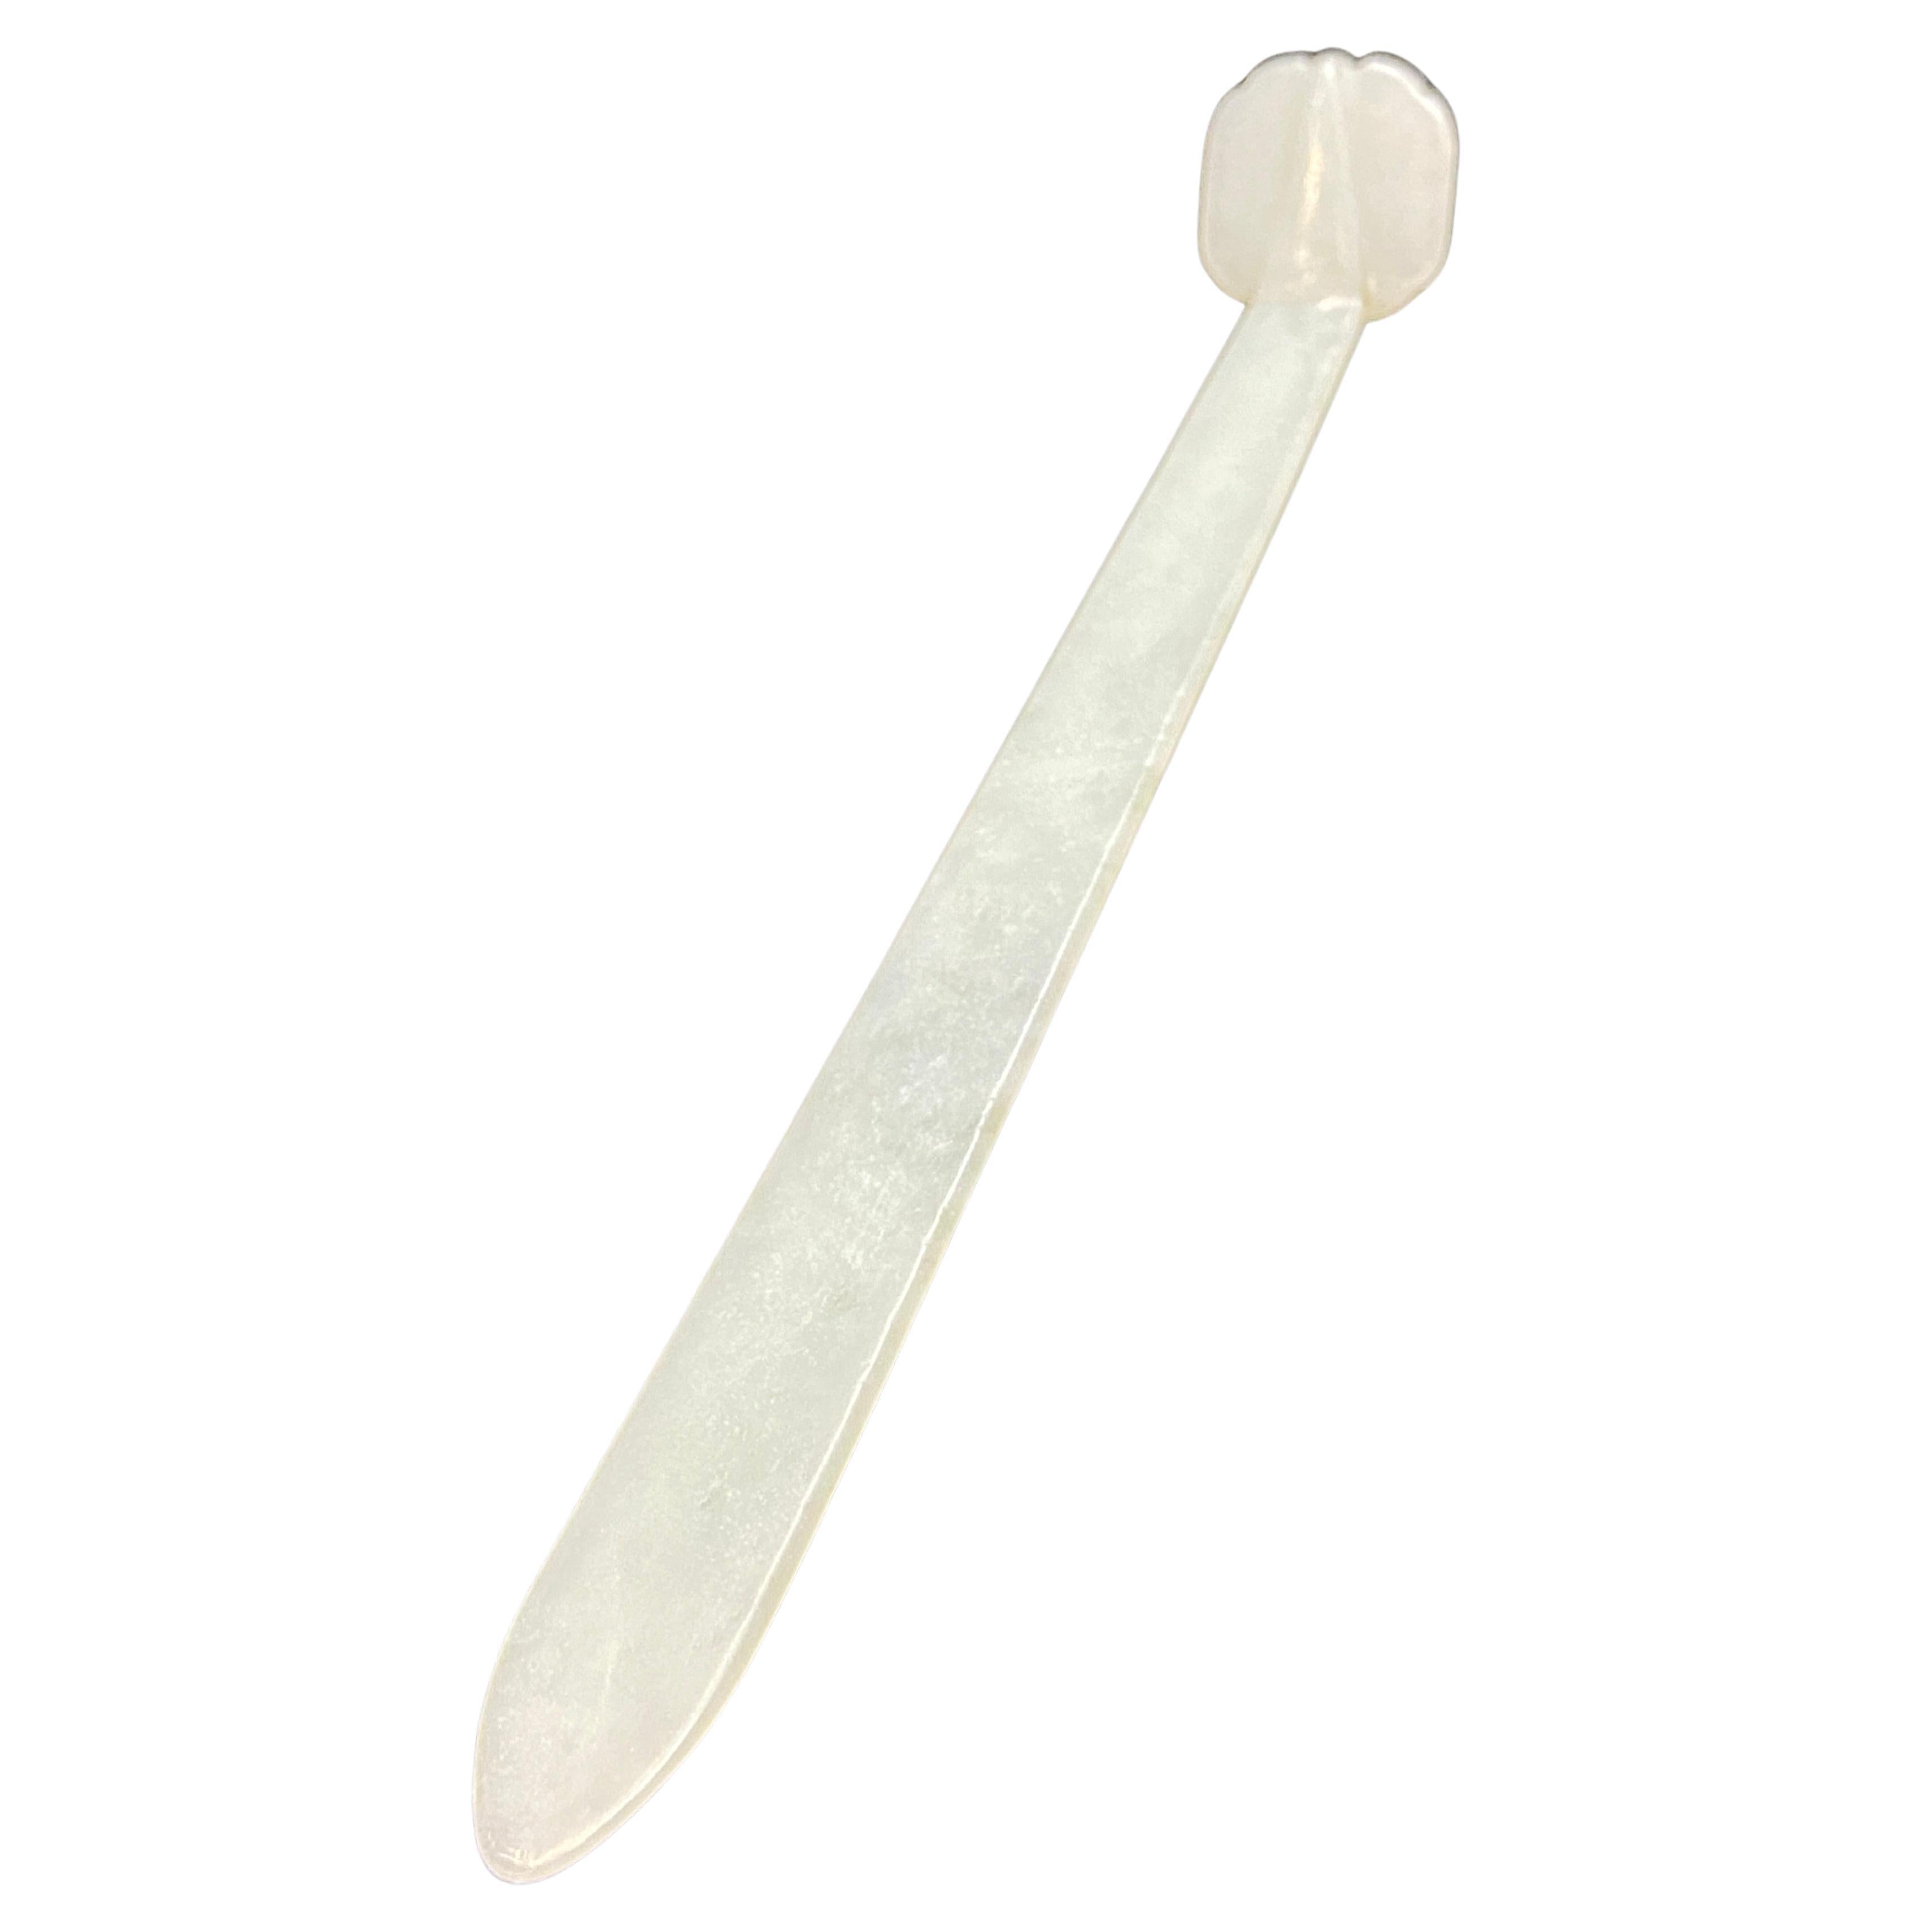 Qing， Hand-carved Celedon white jade hair pin/ 清，白玉弯头簪 （全品）
Condition：Shows normal sign of wear and use，please look carefully before purchase. 
Approximate size：L：14.5 cm，W： 2 cm.  Please refer the size in the images above. 
Terms and policy: 